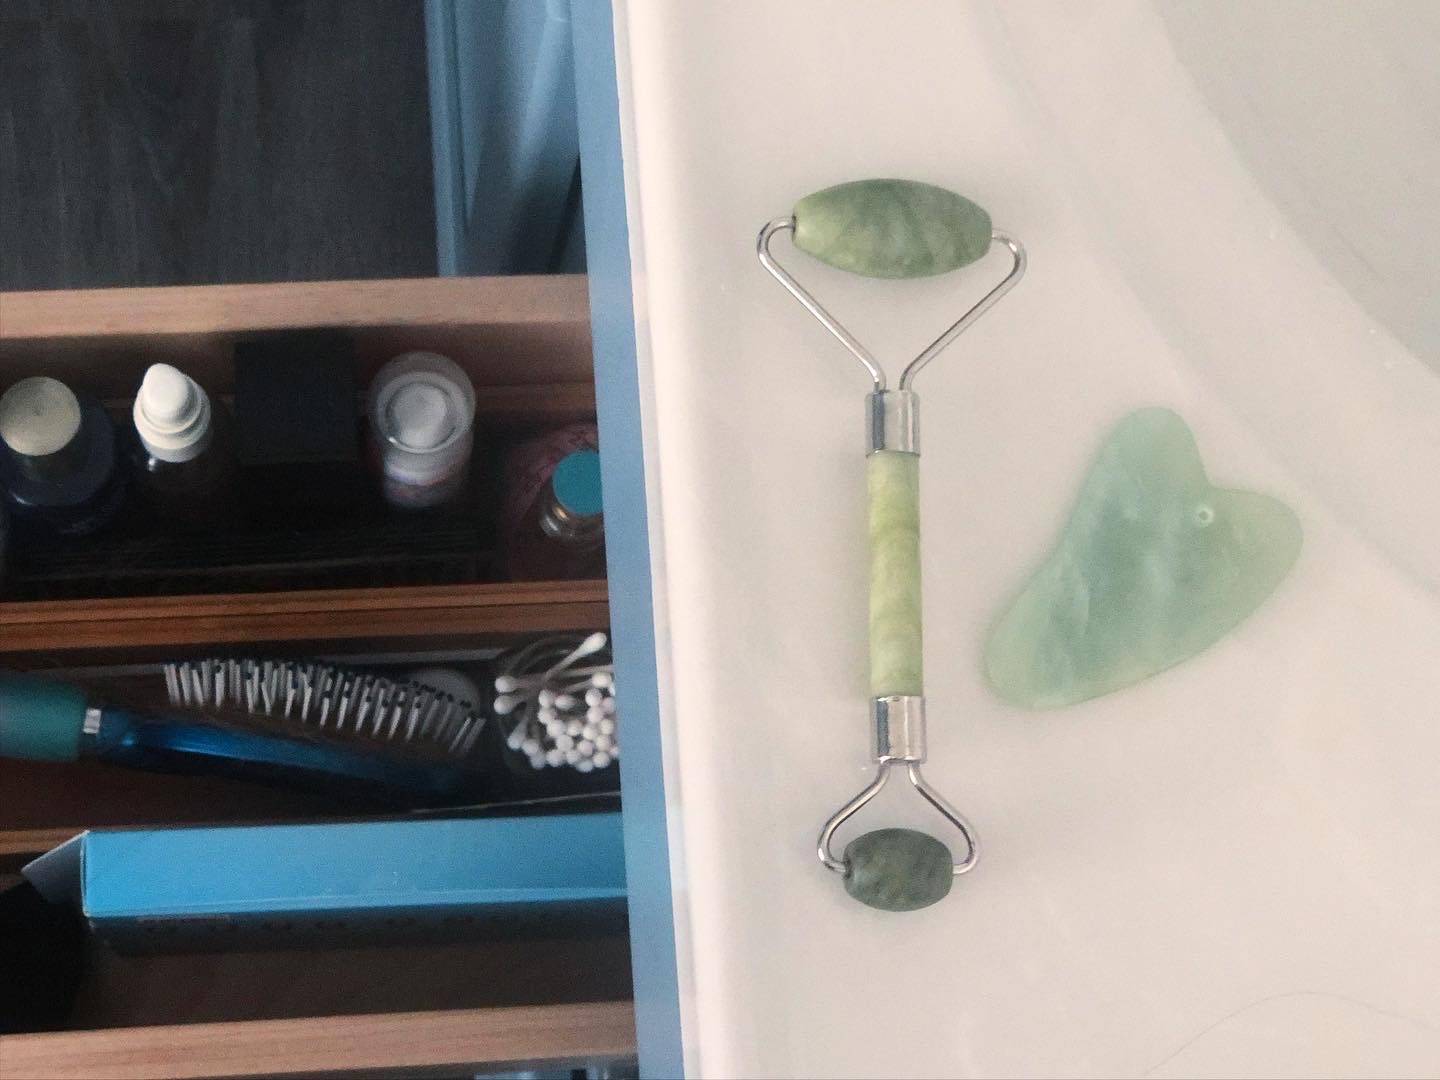 A jade rollers sits on a white bathroom counter. A drawer is open revealing a variety of personal hygiene items. Photo by Alyssa Buckley.